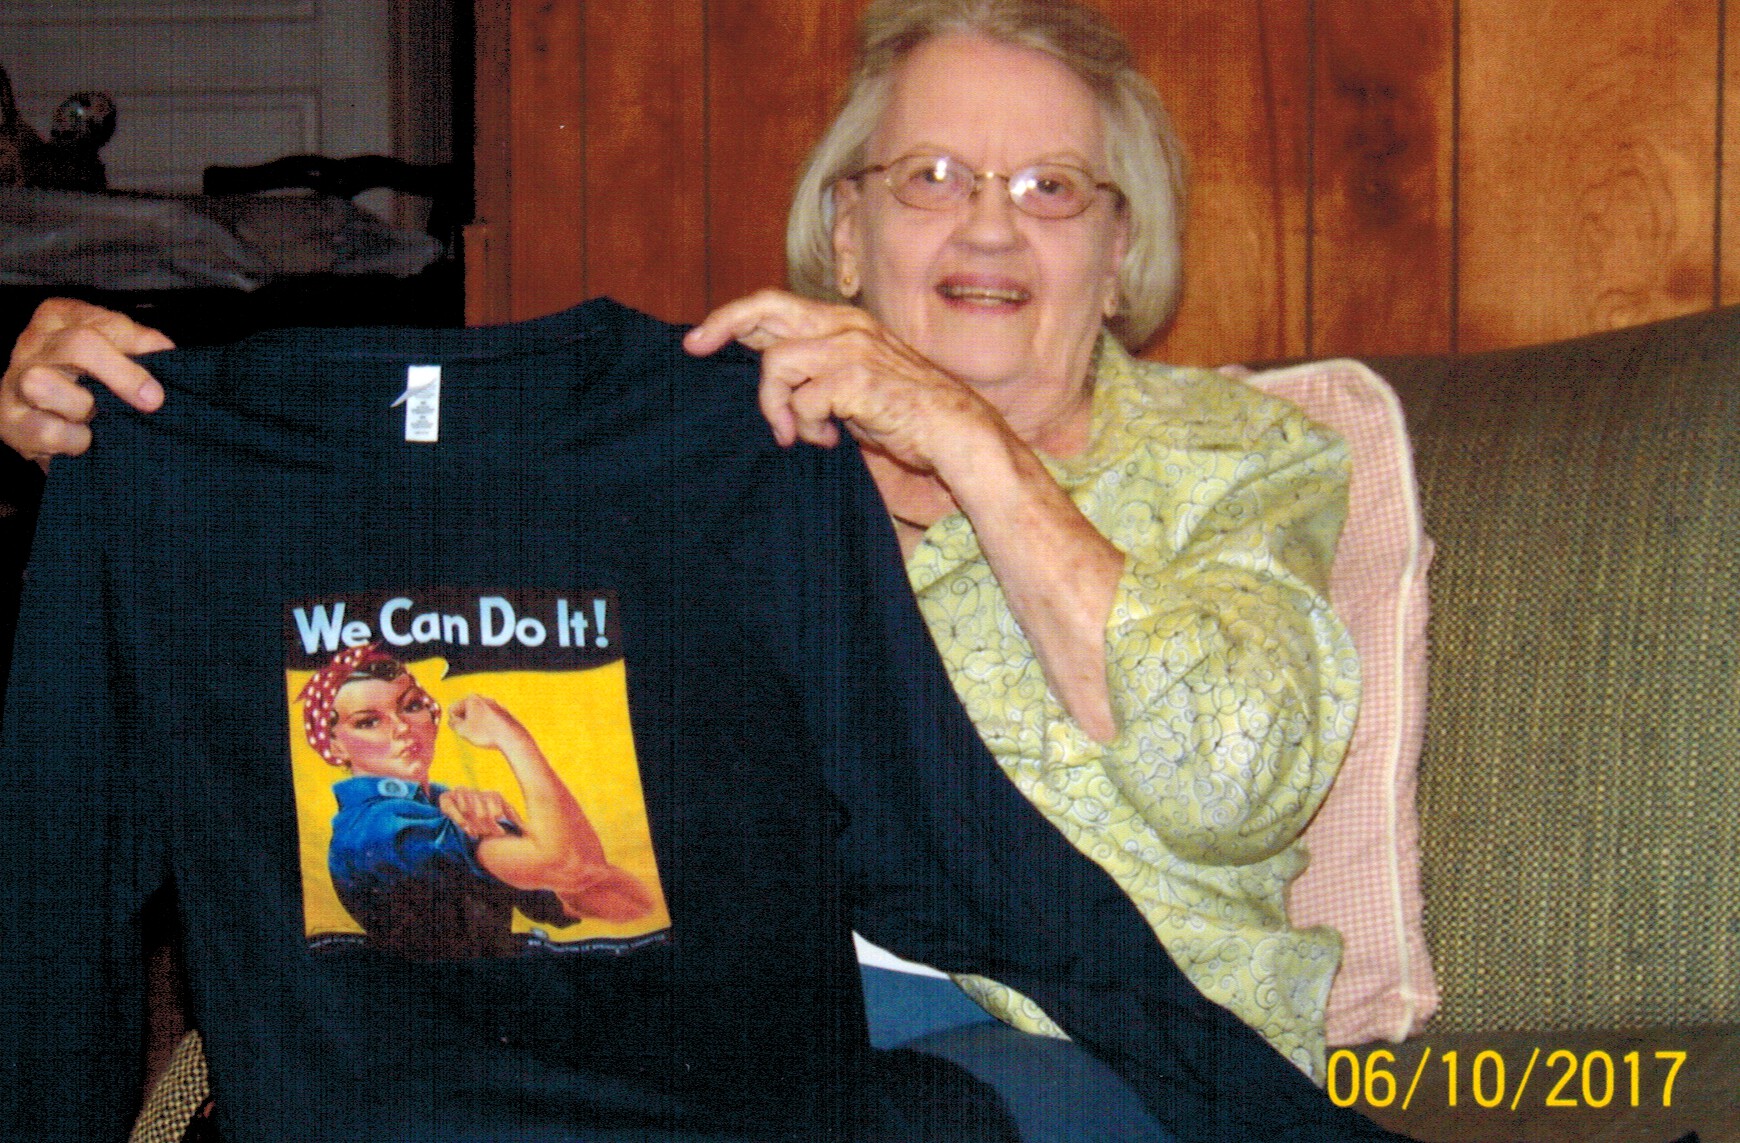 Geneva with "Rosie" tee shirt given to her by her great-grandsons.